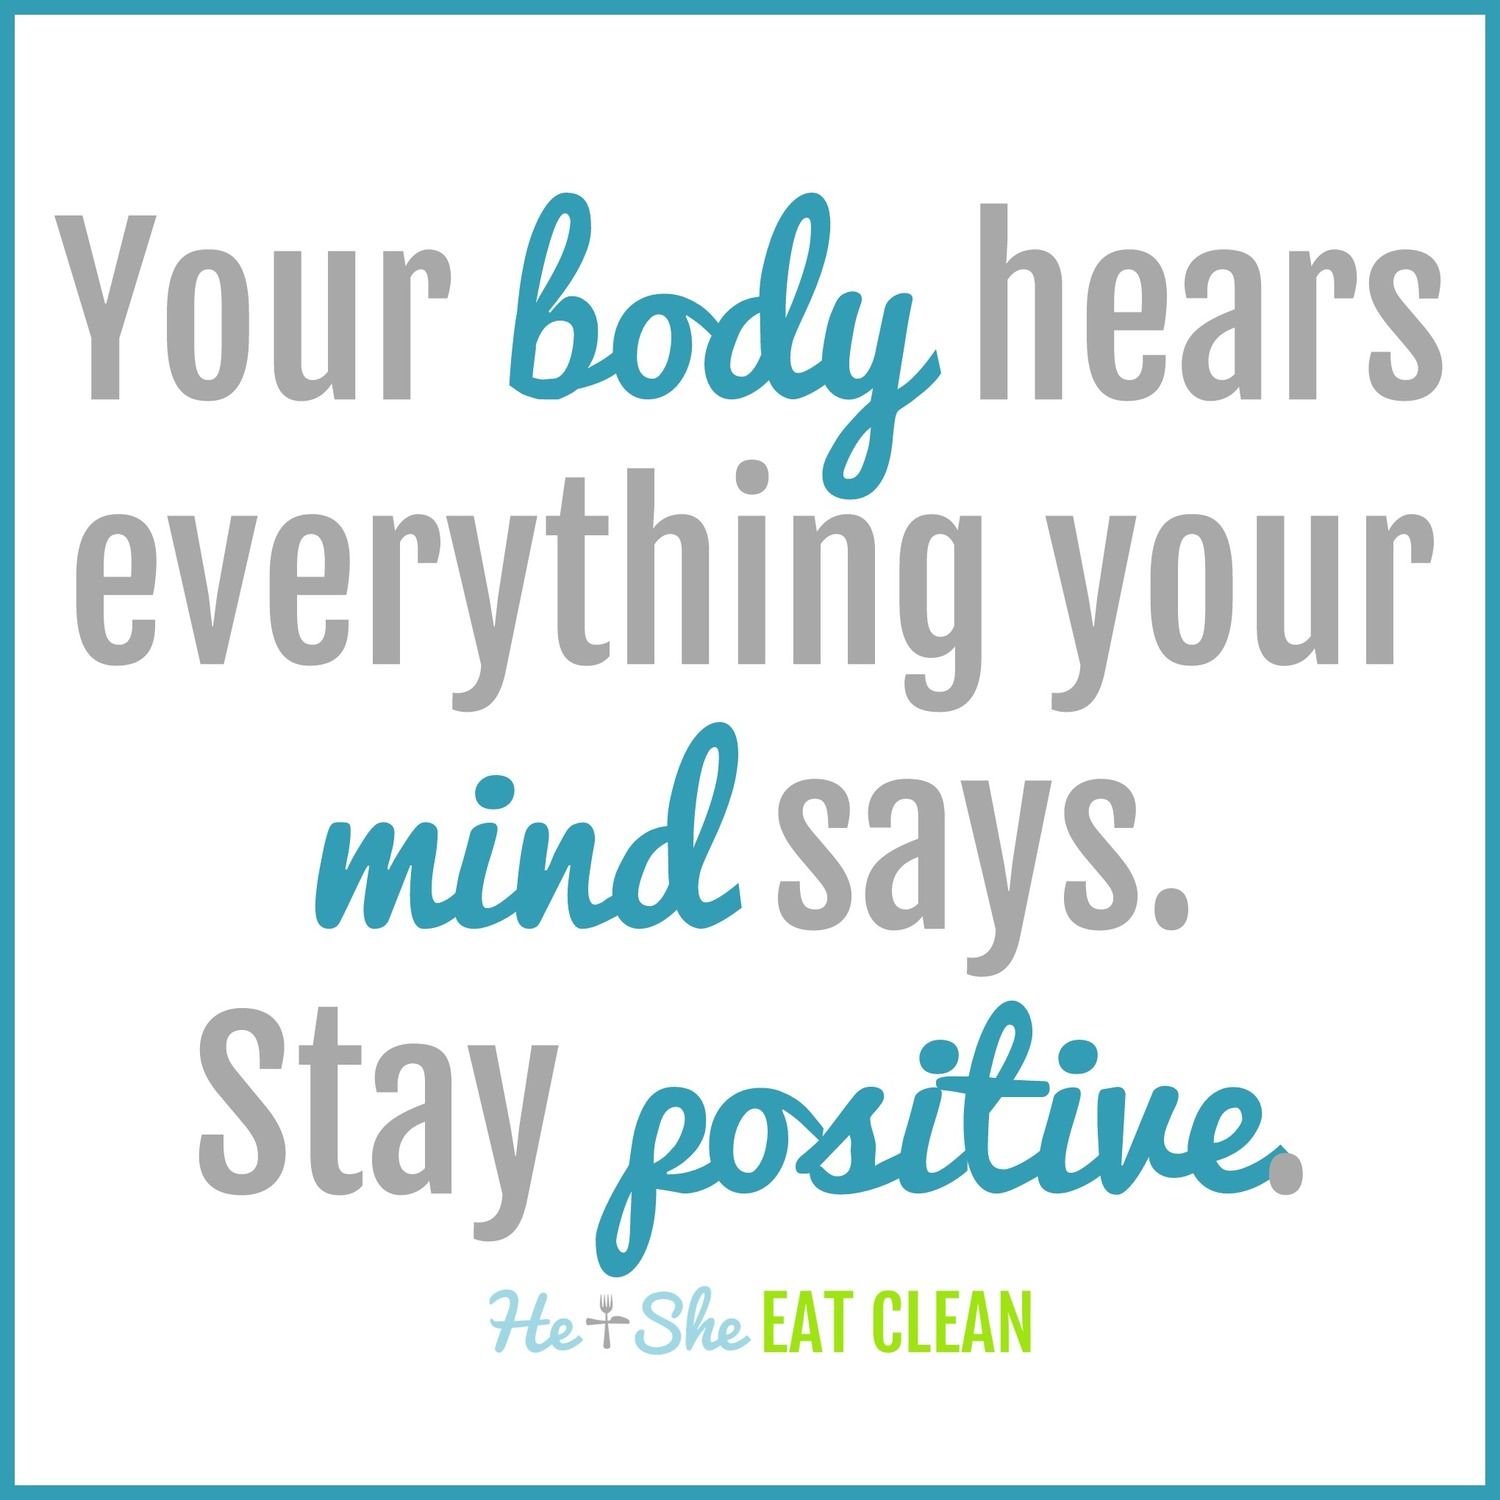 5 Fitness Quotes to Motivate You!